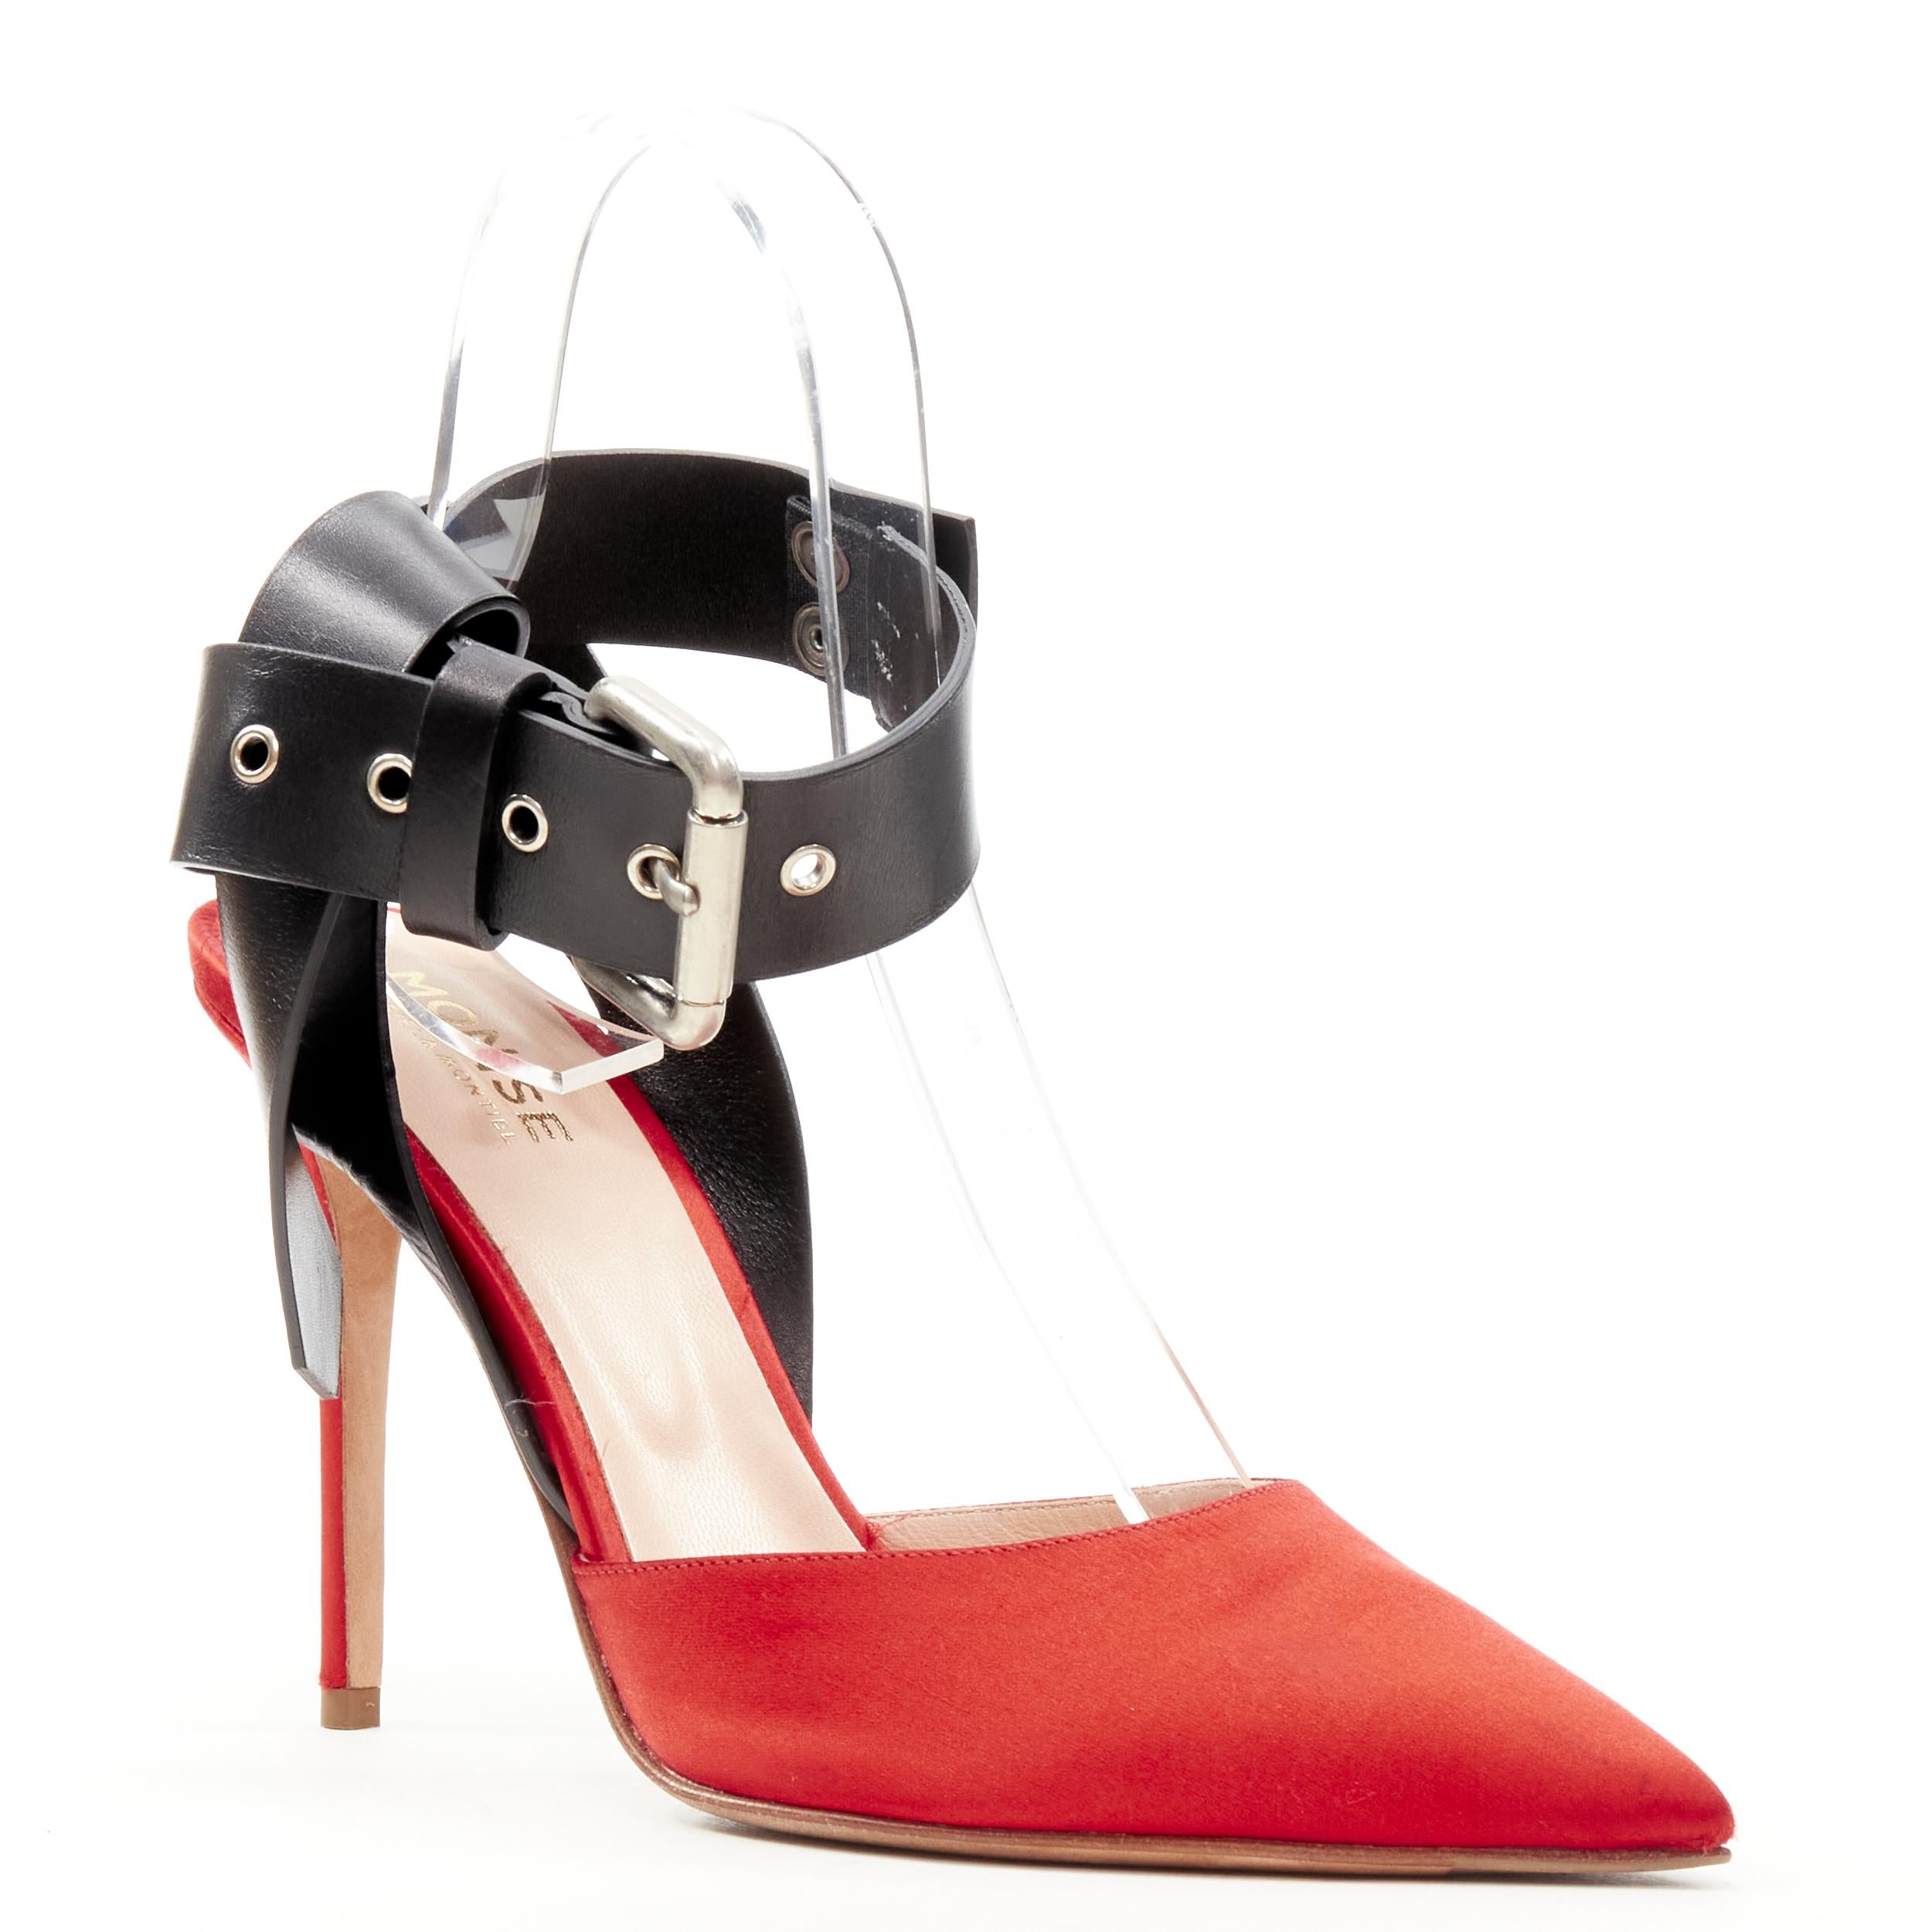 MONSE Runway red satin black punk ankle strap pump EU39 
Reference: KEDG/A00141 
Brand: Monse 
Material: Satin 
Color: Red 
Pattern: Solid 
Closure: Ankle strap 
Extra Detail: Extra long leather ankle strap. Satin heel. 

CONDITION: 
Condition: Very